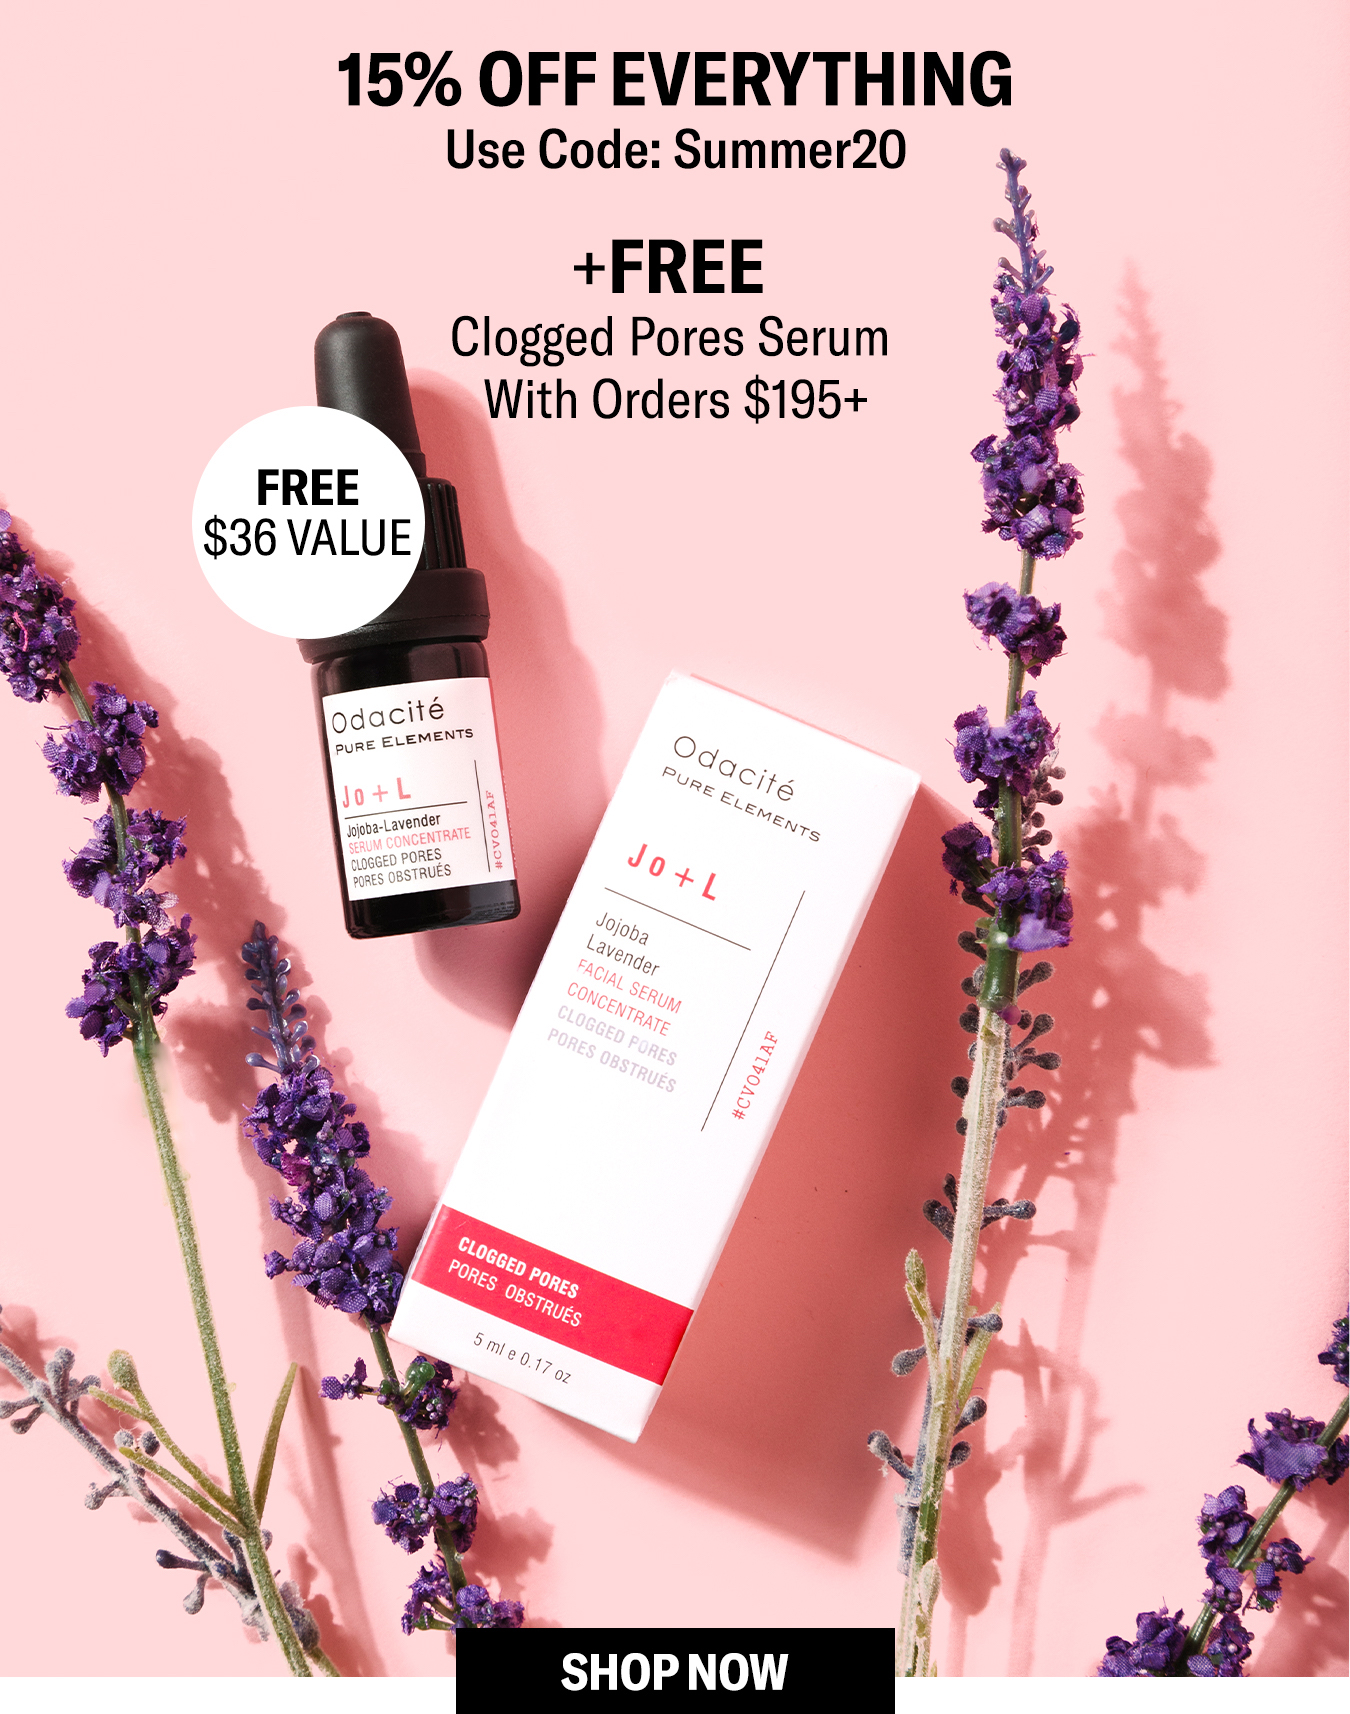 15% Off Everything + Free Clogged Pores Serum Concentrate with Orders $195+. Use Code: Summer20